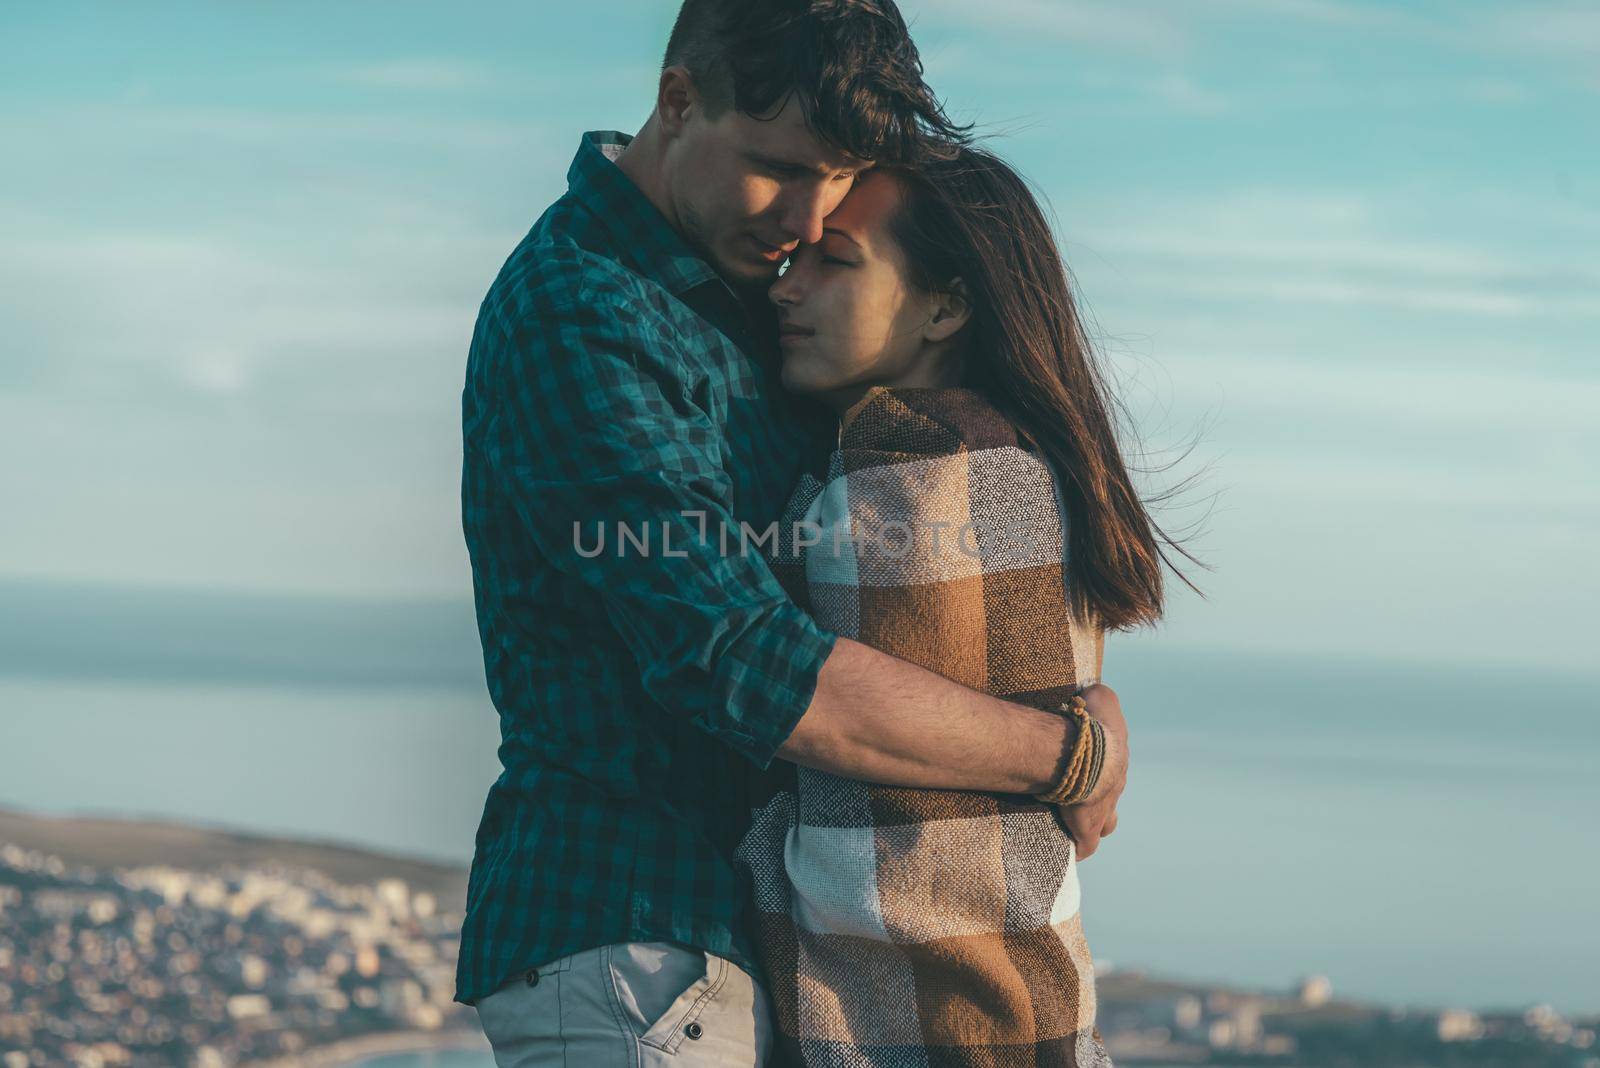 Couple in love. Young man embraces a woman wrapped in plaid on background of sea, tranquil scene